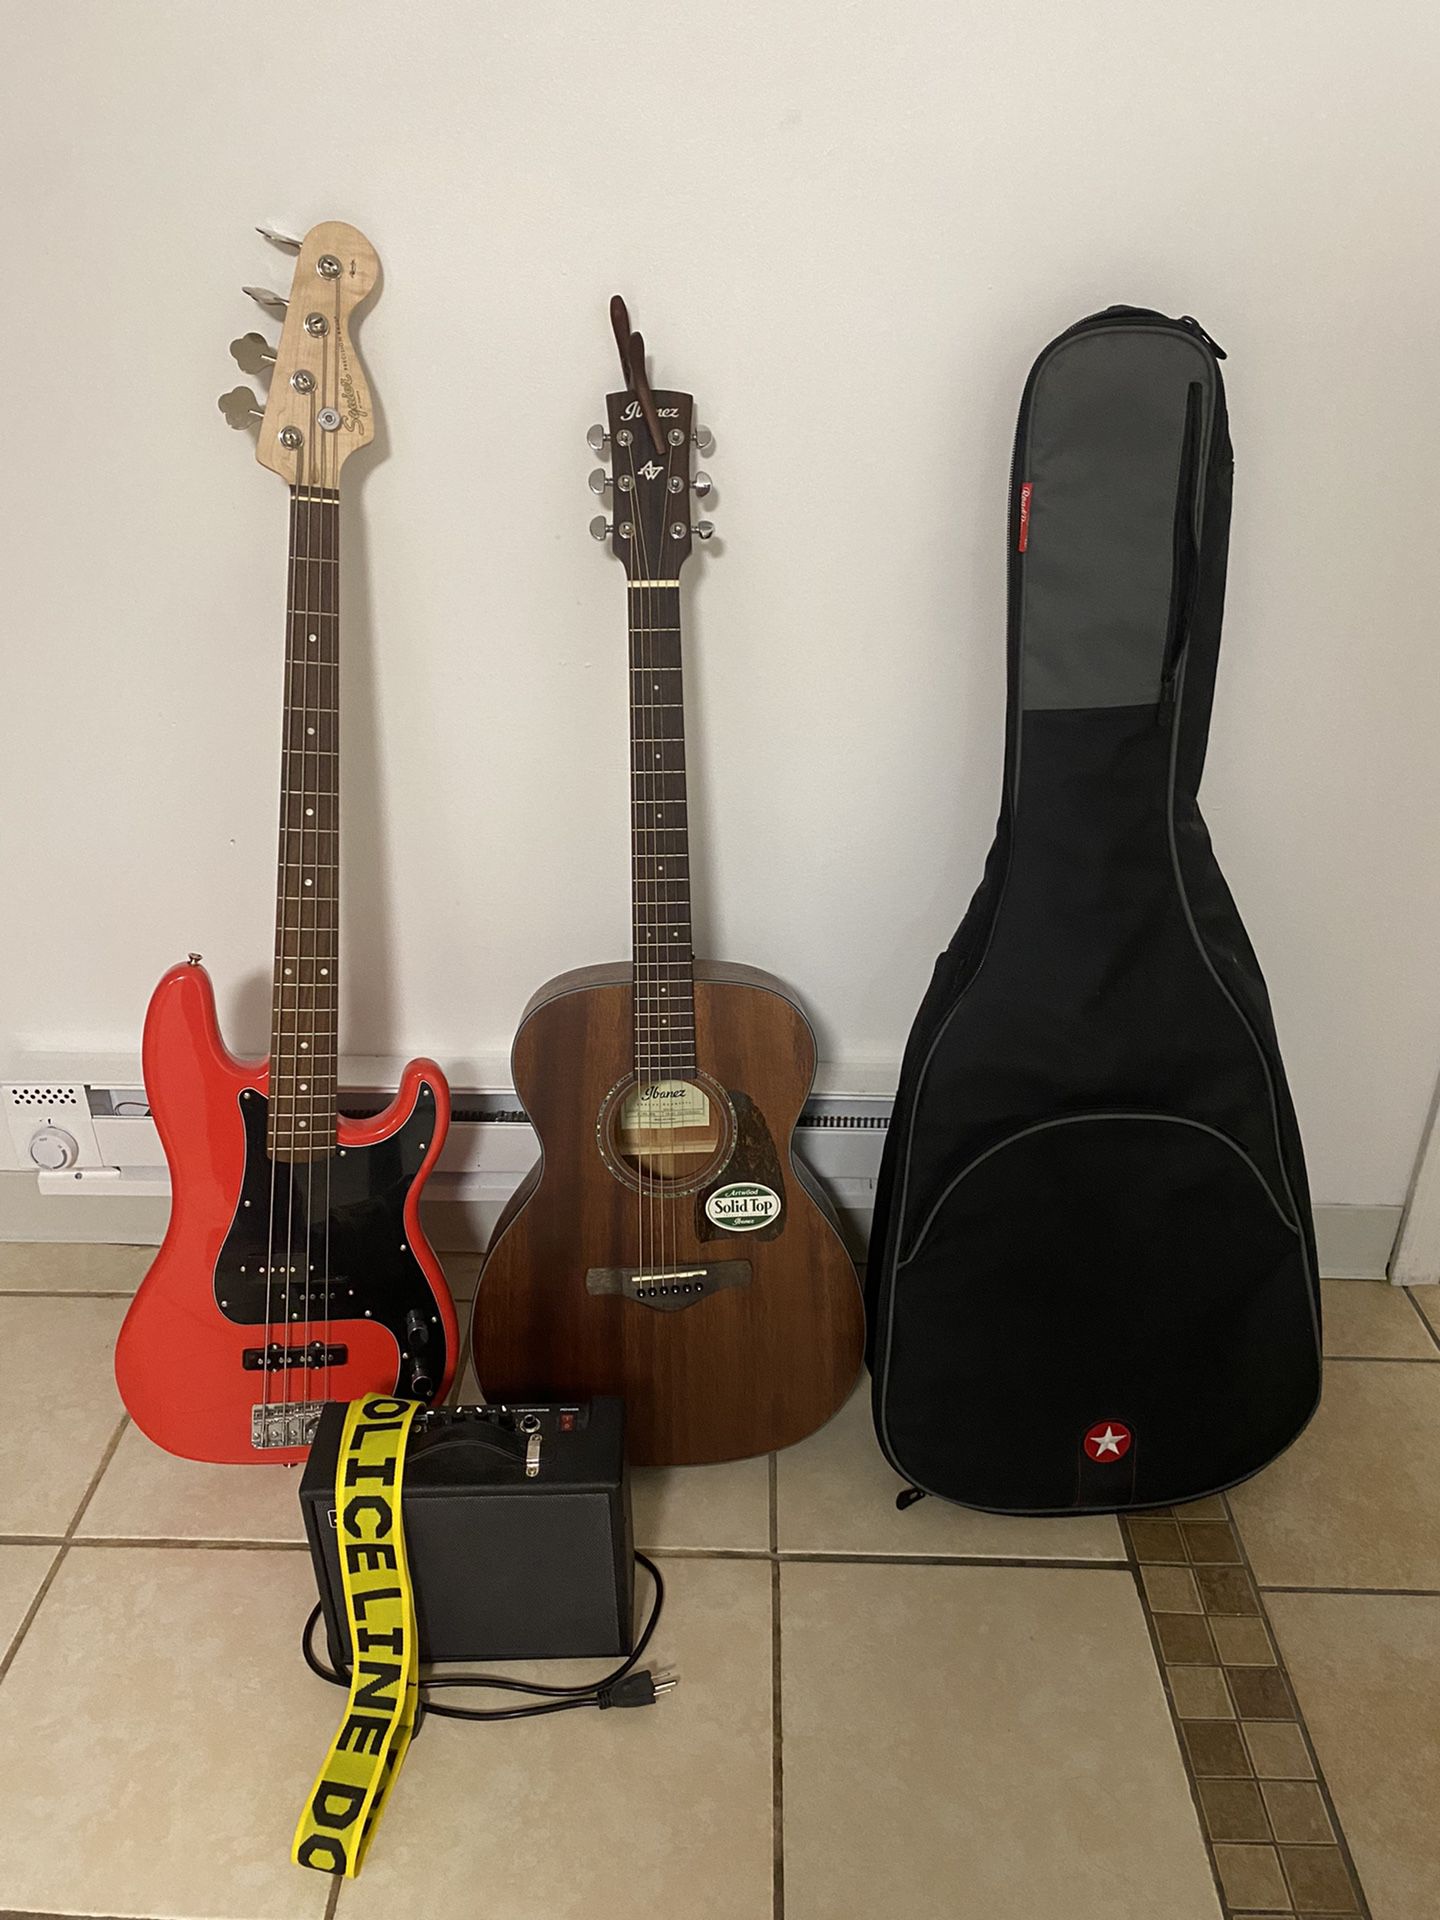 Guitars and Guitar Accesories - Prices for Items In Description